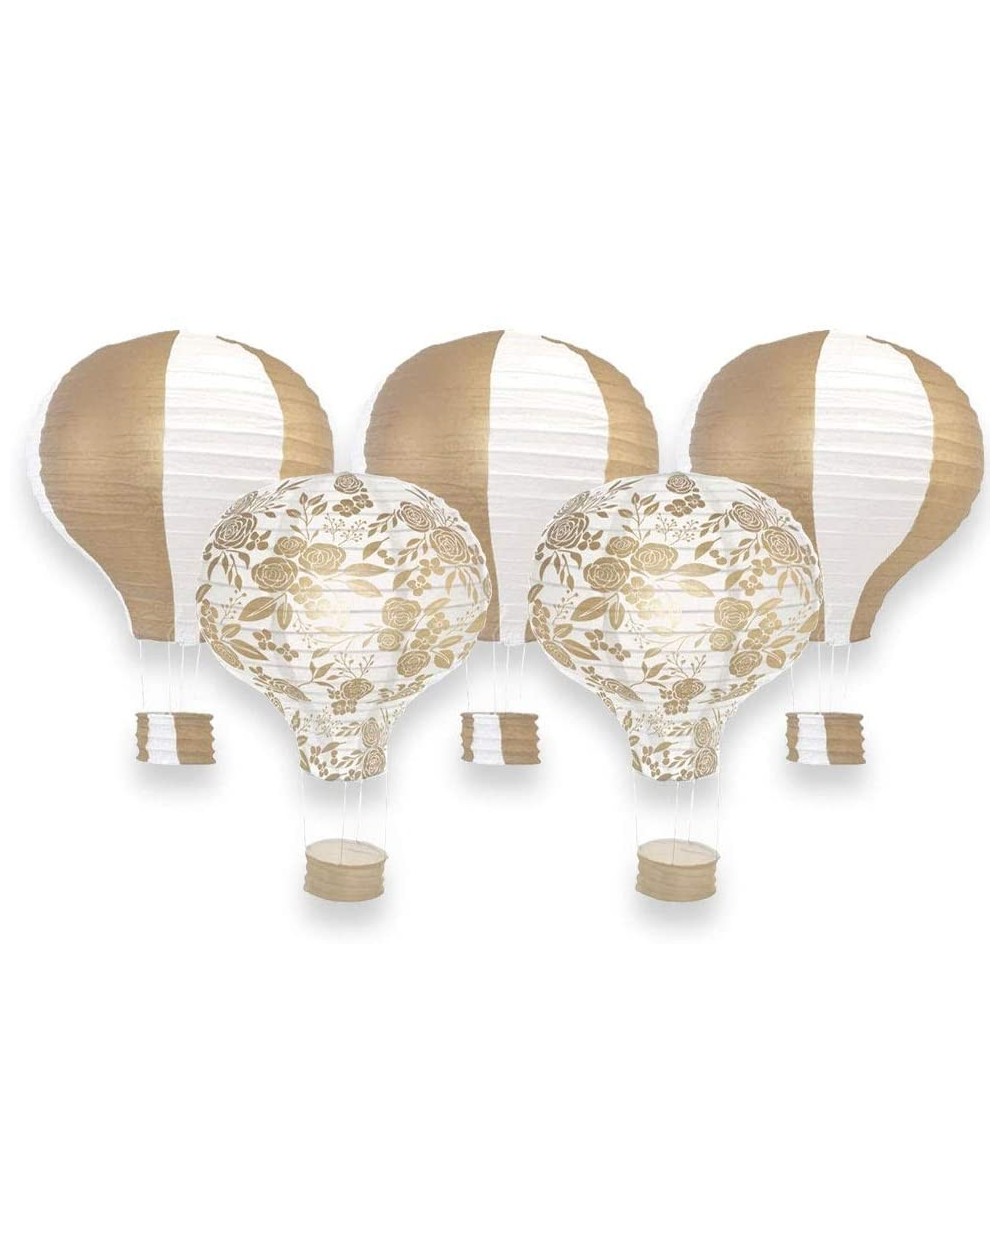 Sky Lanterns Decorative 12-Inch Hanging Hot Air Balloon Paper Lanterns (5pc- Gold Floral) - Gold Floral - CZ17YHT2M9A $18.70